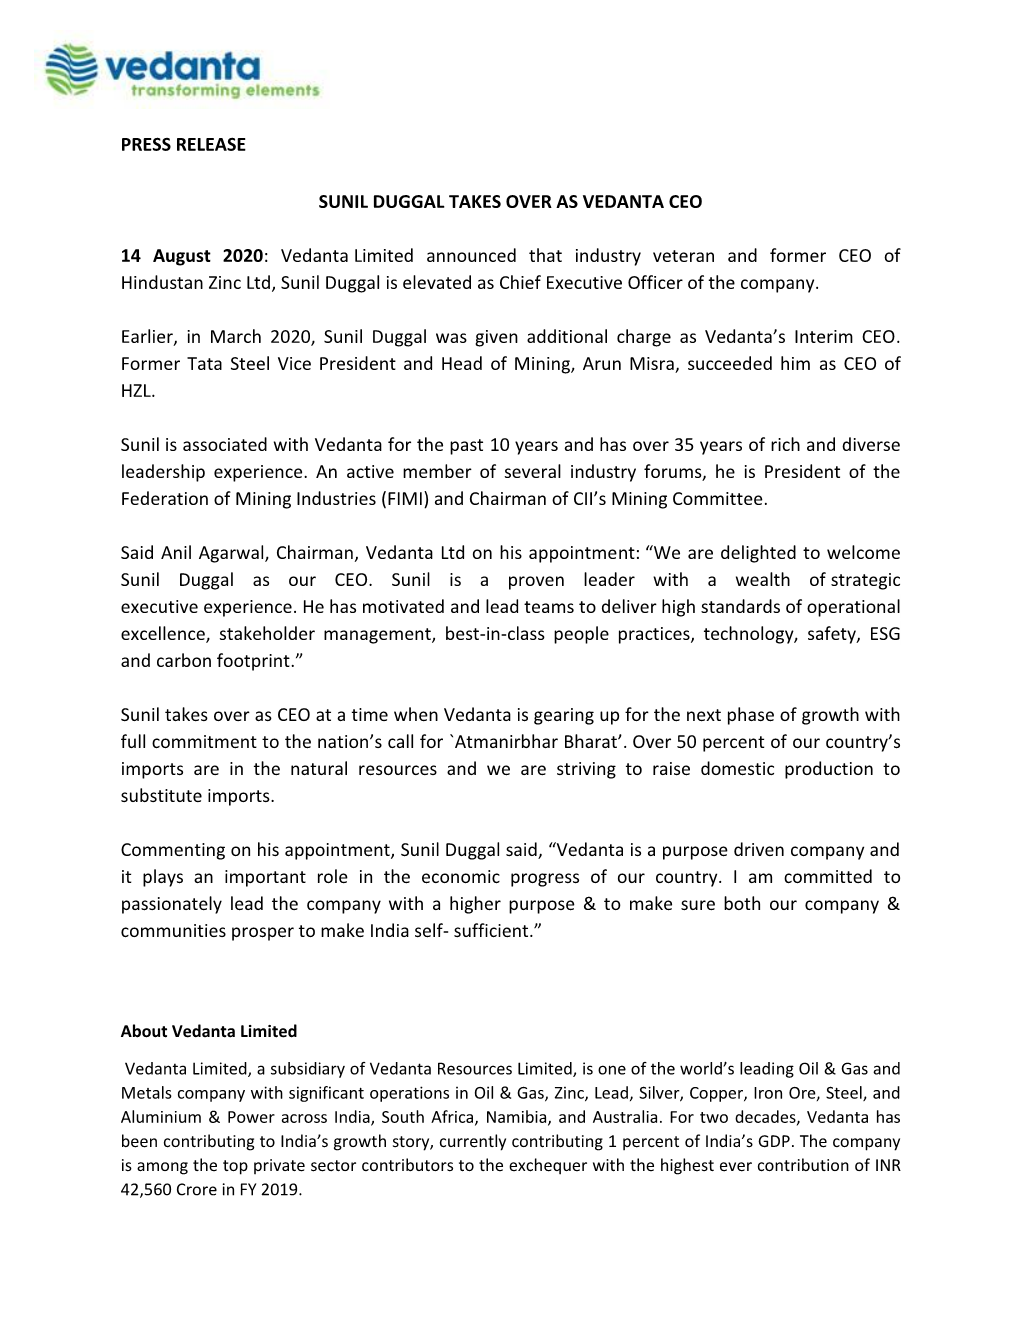 Press Release Sunil Duggal Takes Over As